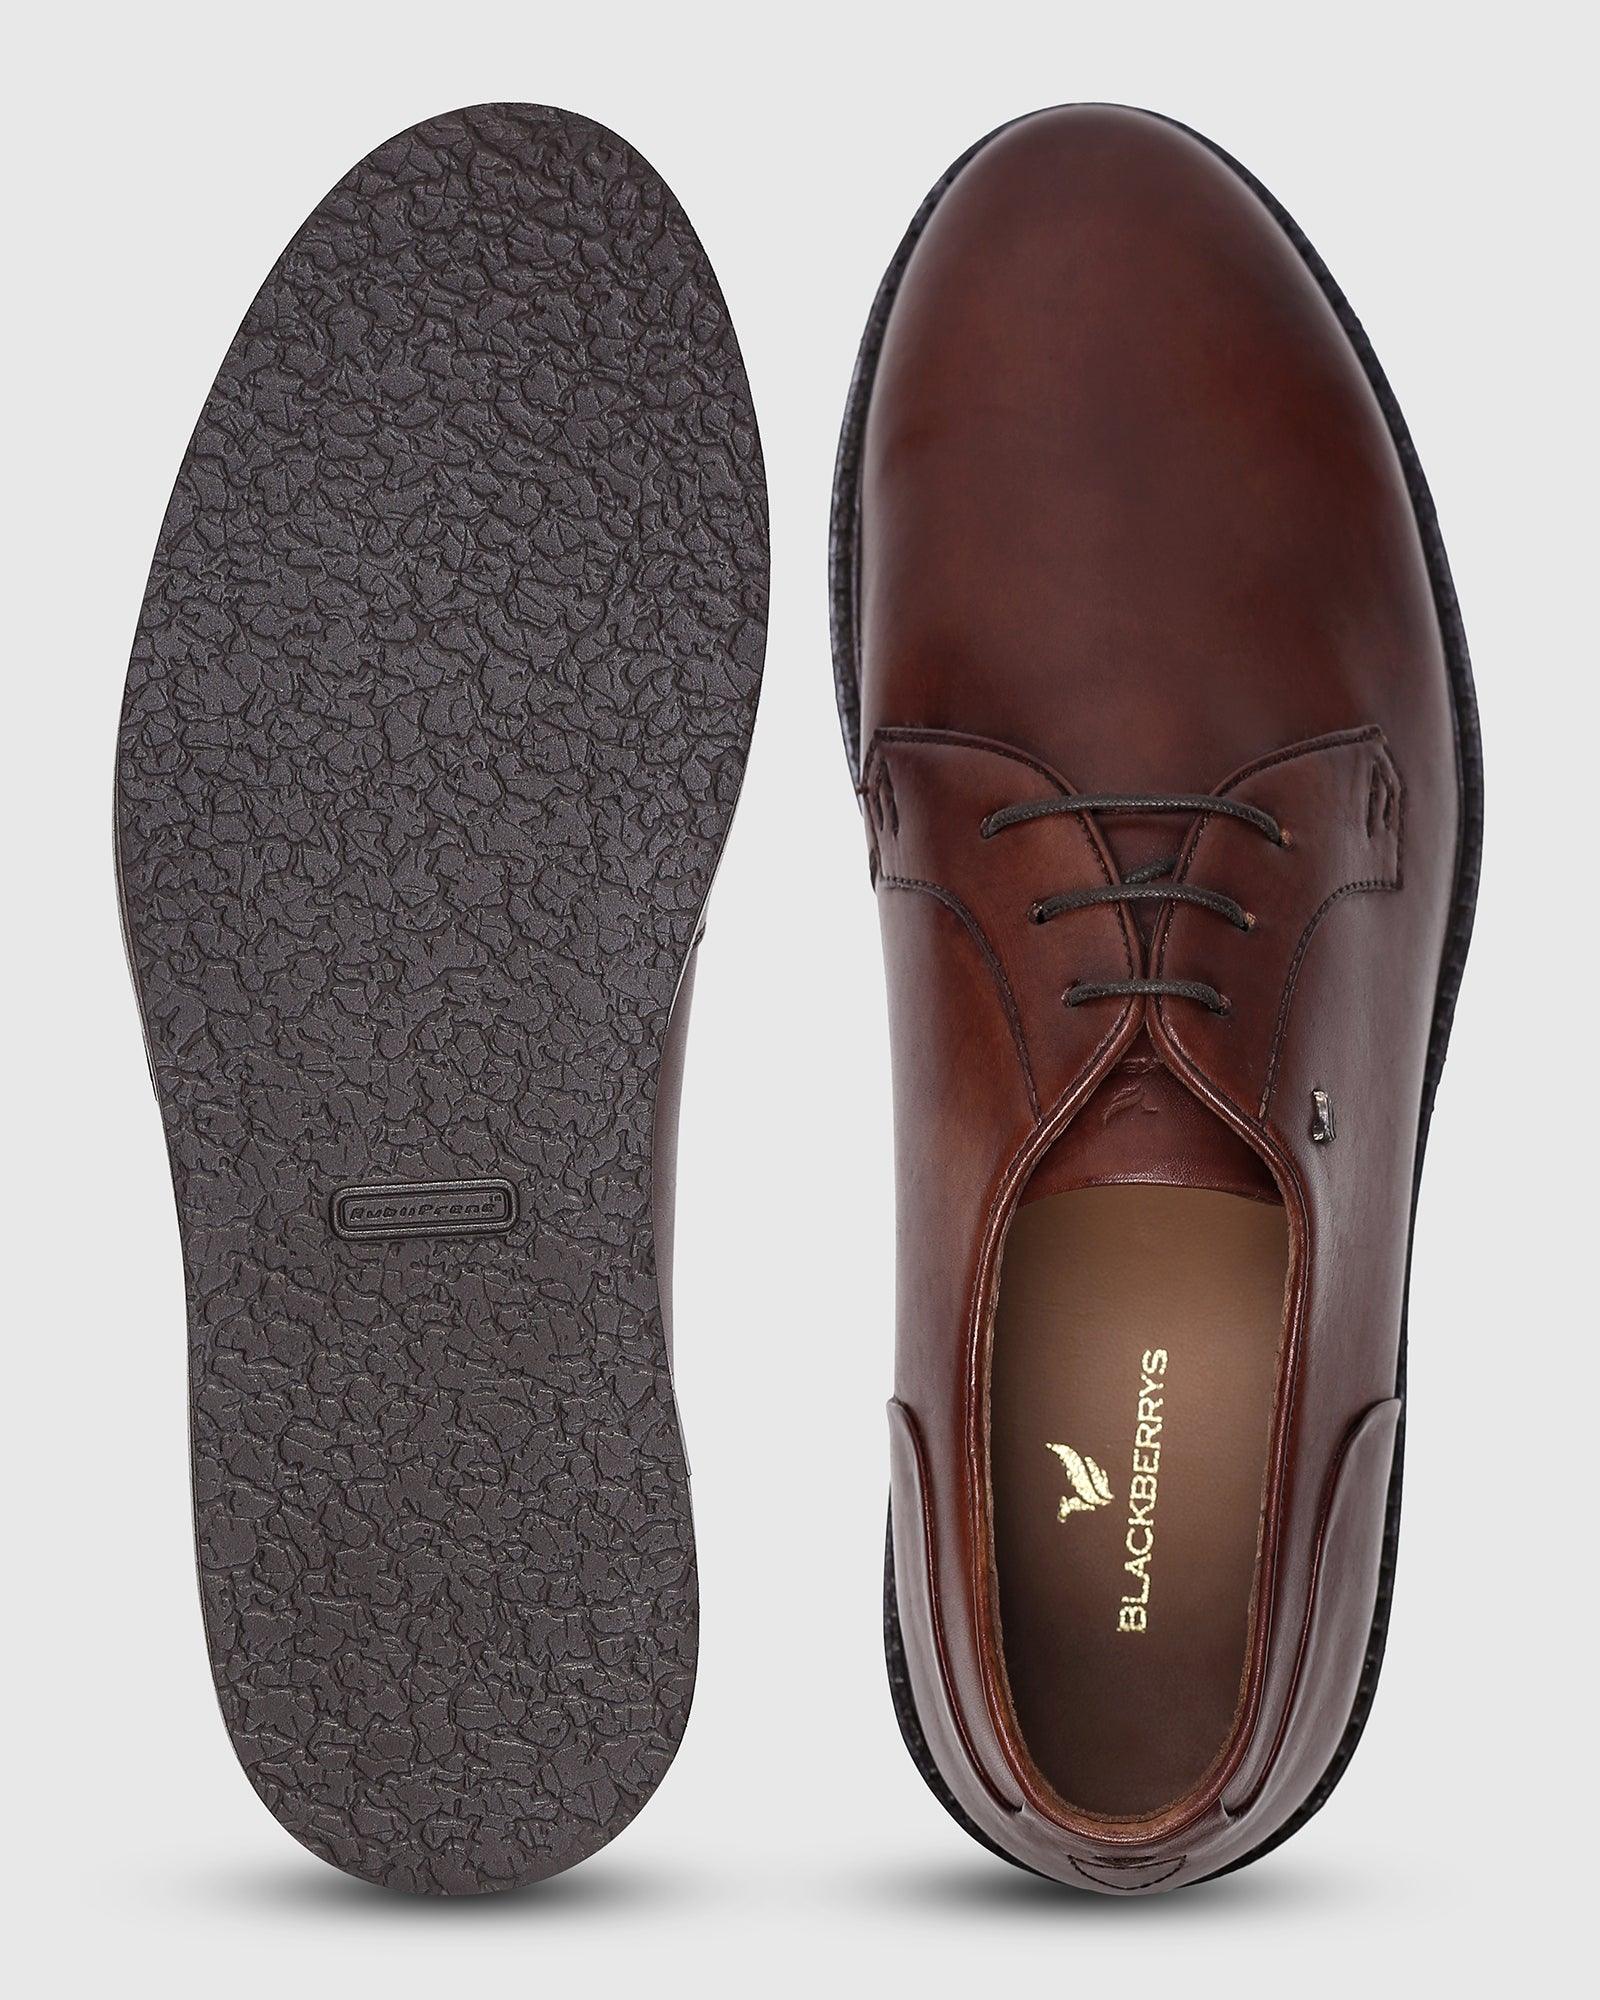 Leather Formal Brown Solid Derby Shoes - Prex